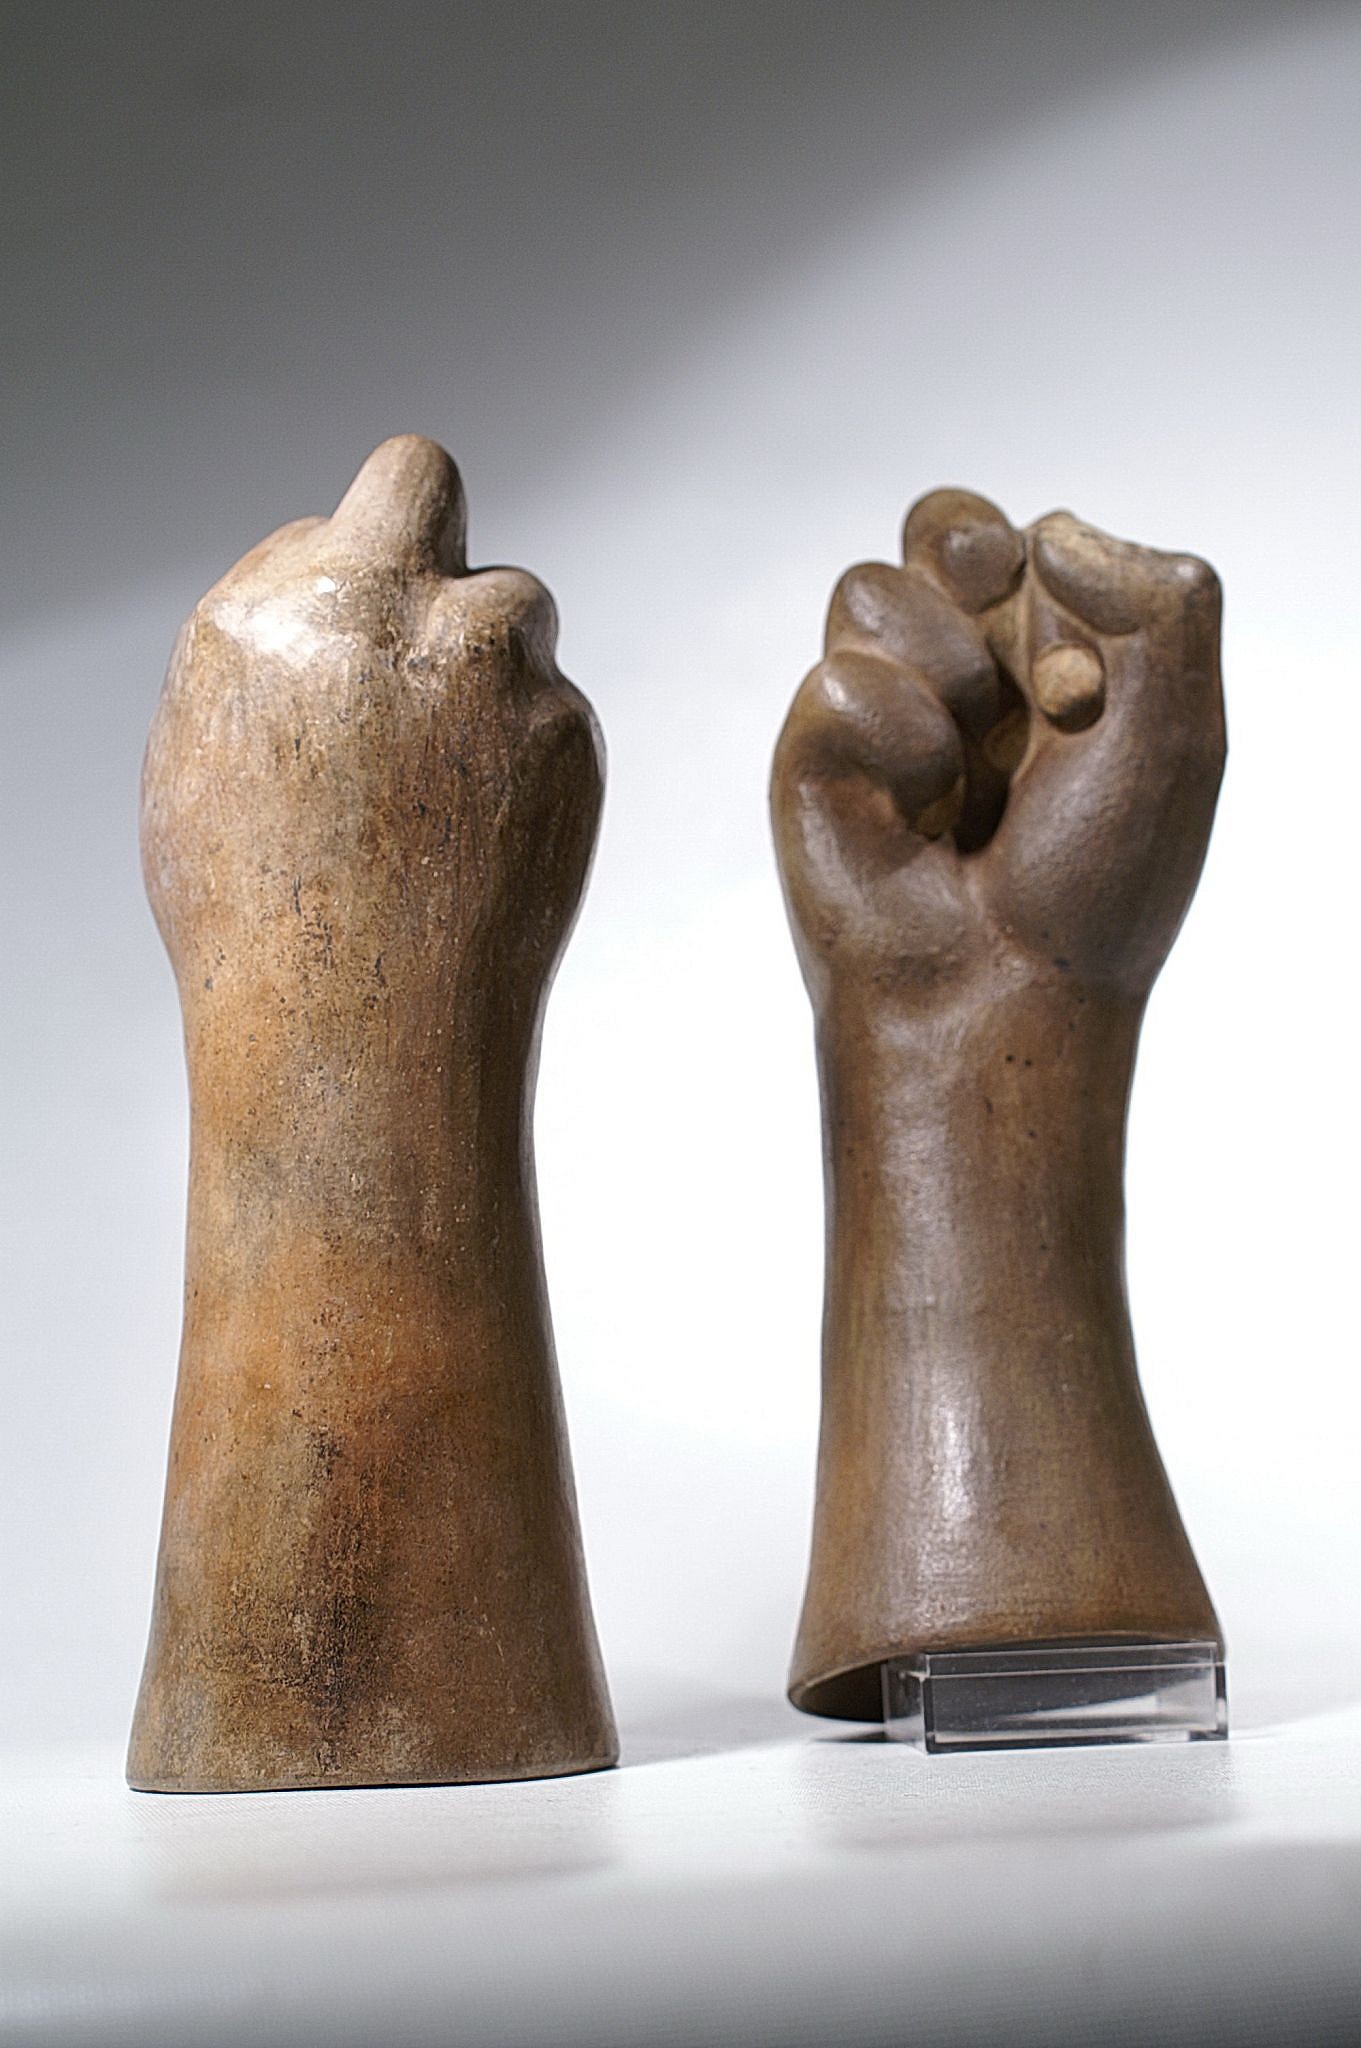 Peru, Two Moche Ceramic Hands with Clenched Fists
Although hands such as these are well documented for the Moche, it is rare to find two together from the same artist / workshop. The clenched fist, with raised middle knuckle, represents mountains and highland lagoons where sacrifices and divinatory rituals took place (Donnan, Moche Art of Peru 1978: 152-153 and fig. 235). Christopher Donnan further discusses the symbolism of such hands in "Andean Art at Dumbarton Oaks (1966: I: 136-139), where a bone carved as a clenched fist was studded with inlays of precious turquoise.
Media: Ceramic
Dimensions: Height 10"( 25cm) and Height  9 3/4"(24 cm)
Price Upon Request
M6064